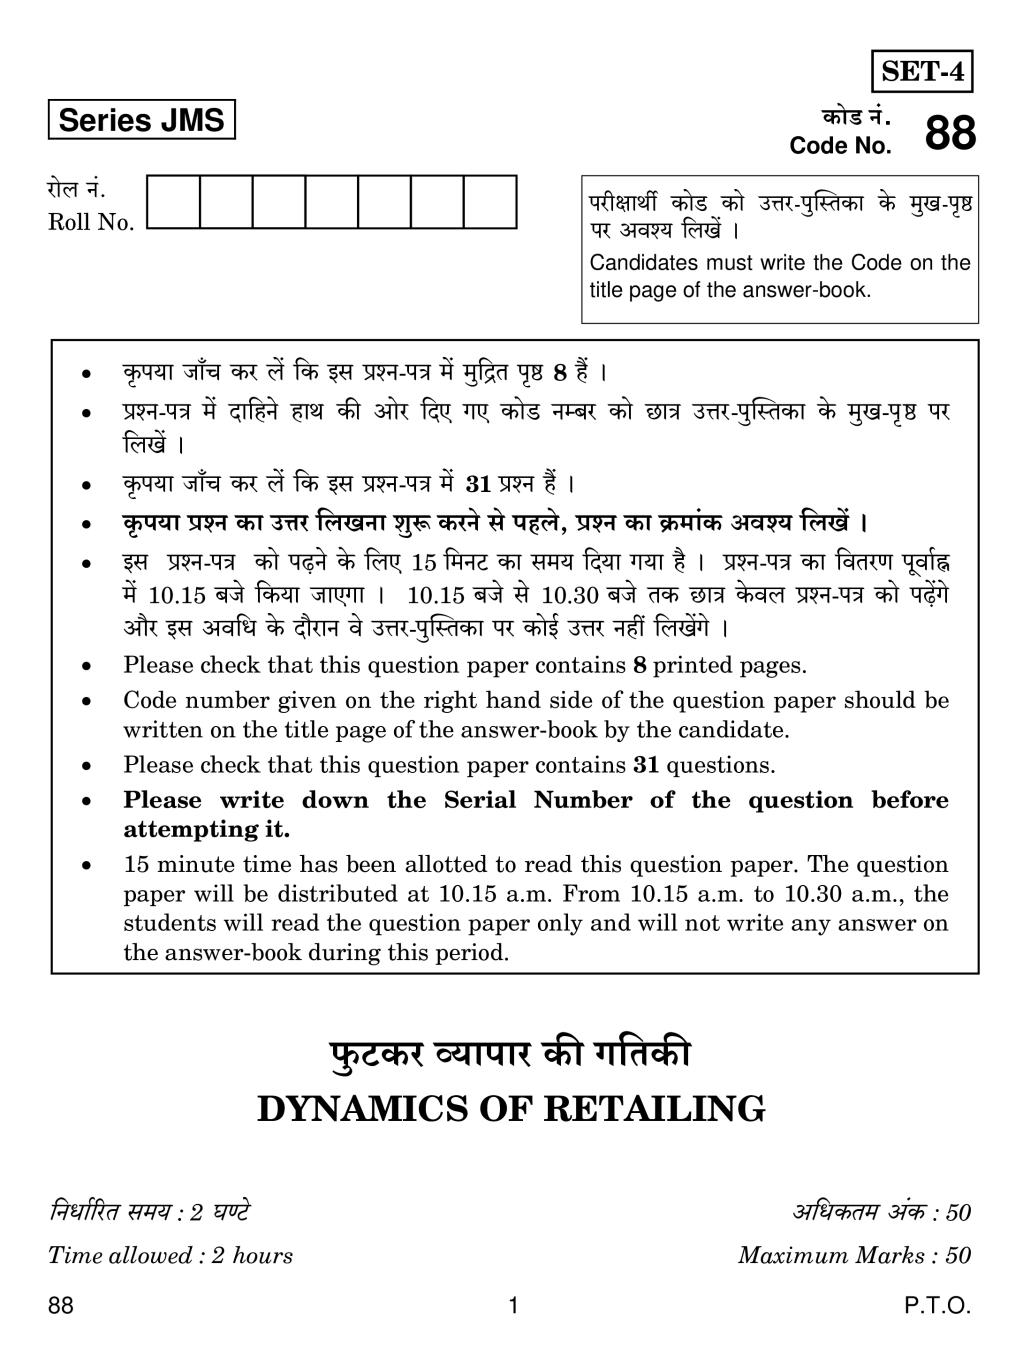 CBSE Class 10 Dynamics of Retailing Question Paper 2019 - Page 1